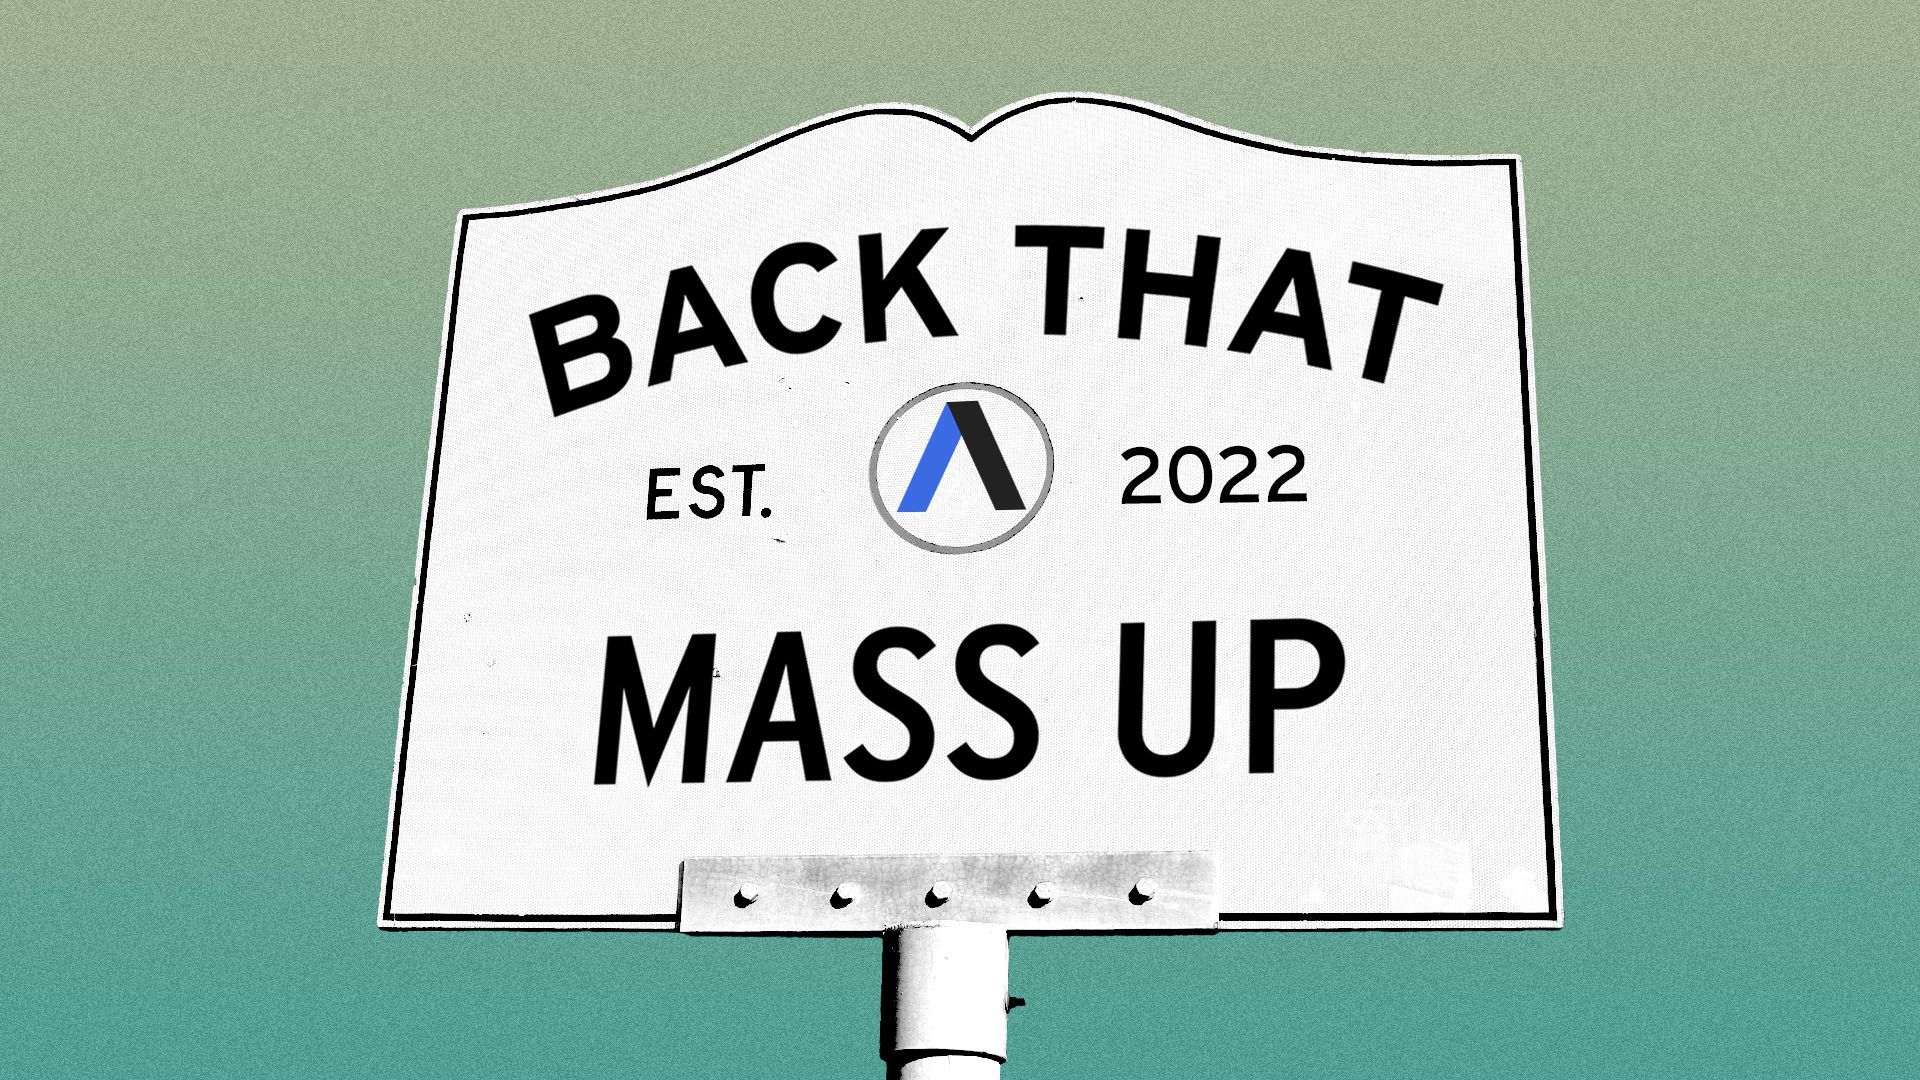 Illustration of a Massachusetts city and town sign reading Back that Mass up, with the Axios Logo in place of the Massachusetts seal.